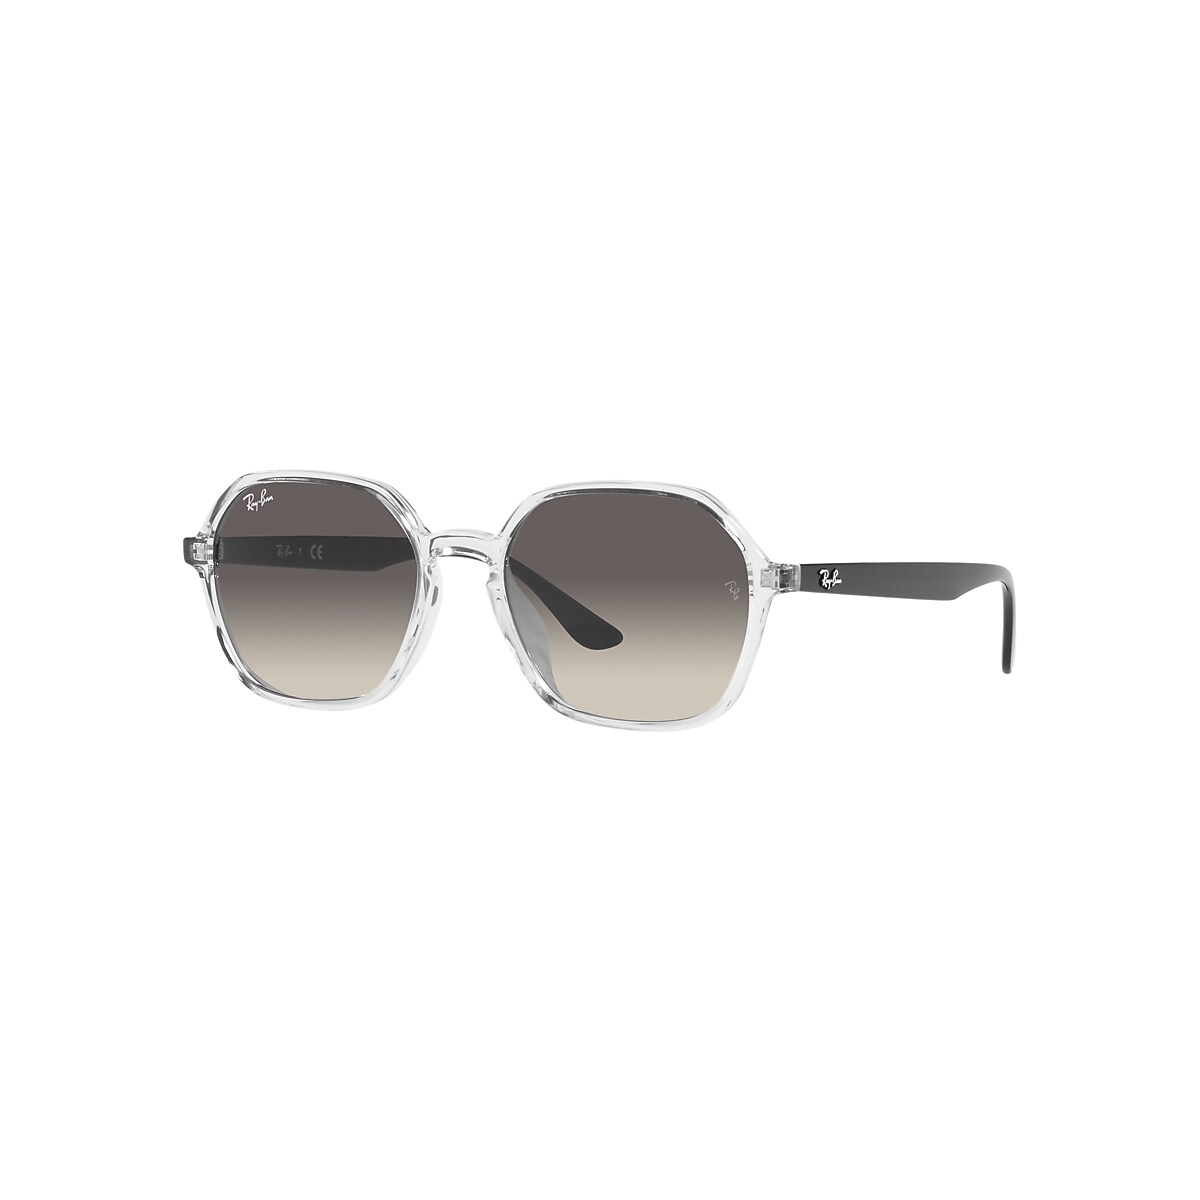 RB4361 Sunglasses in Transparent and Grey - RB4361F | Ray-Ban